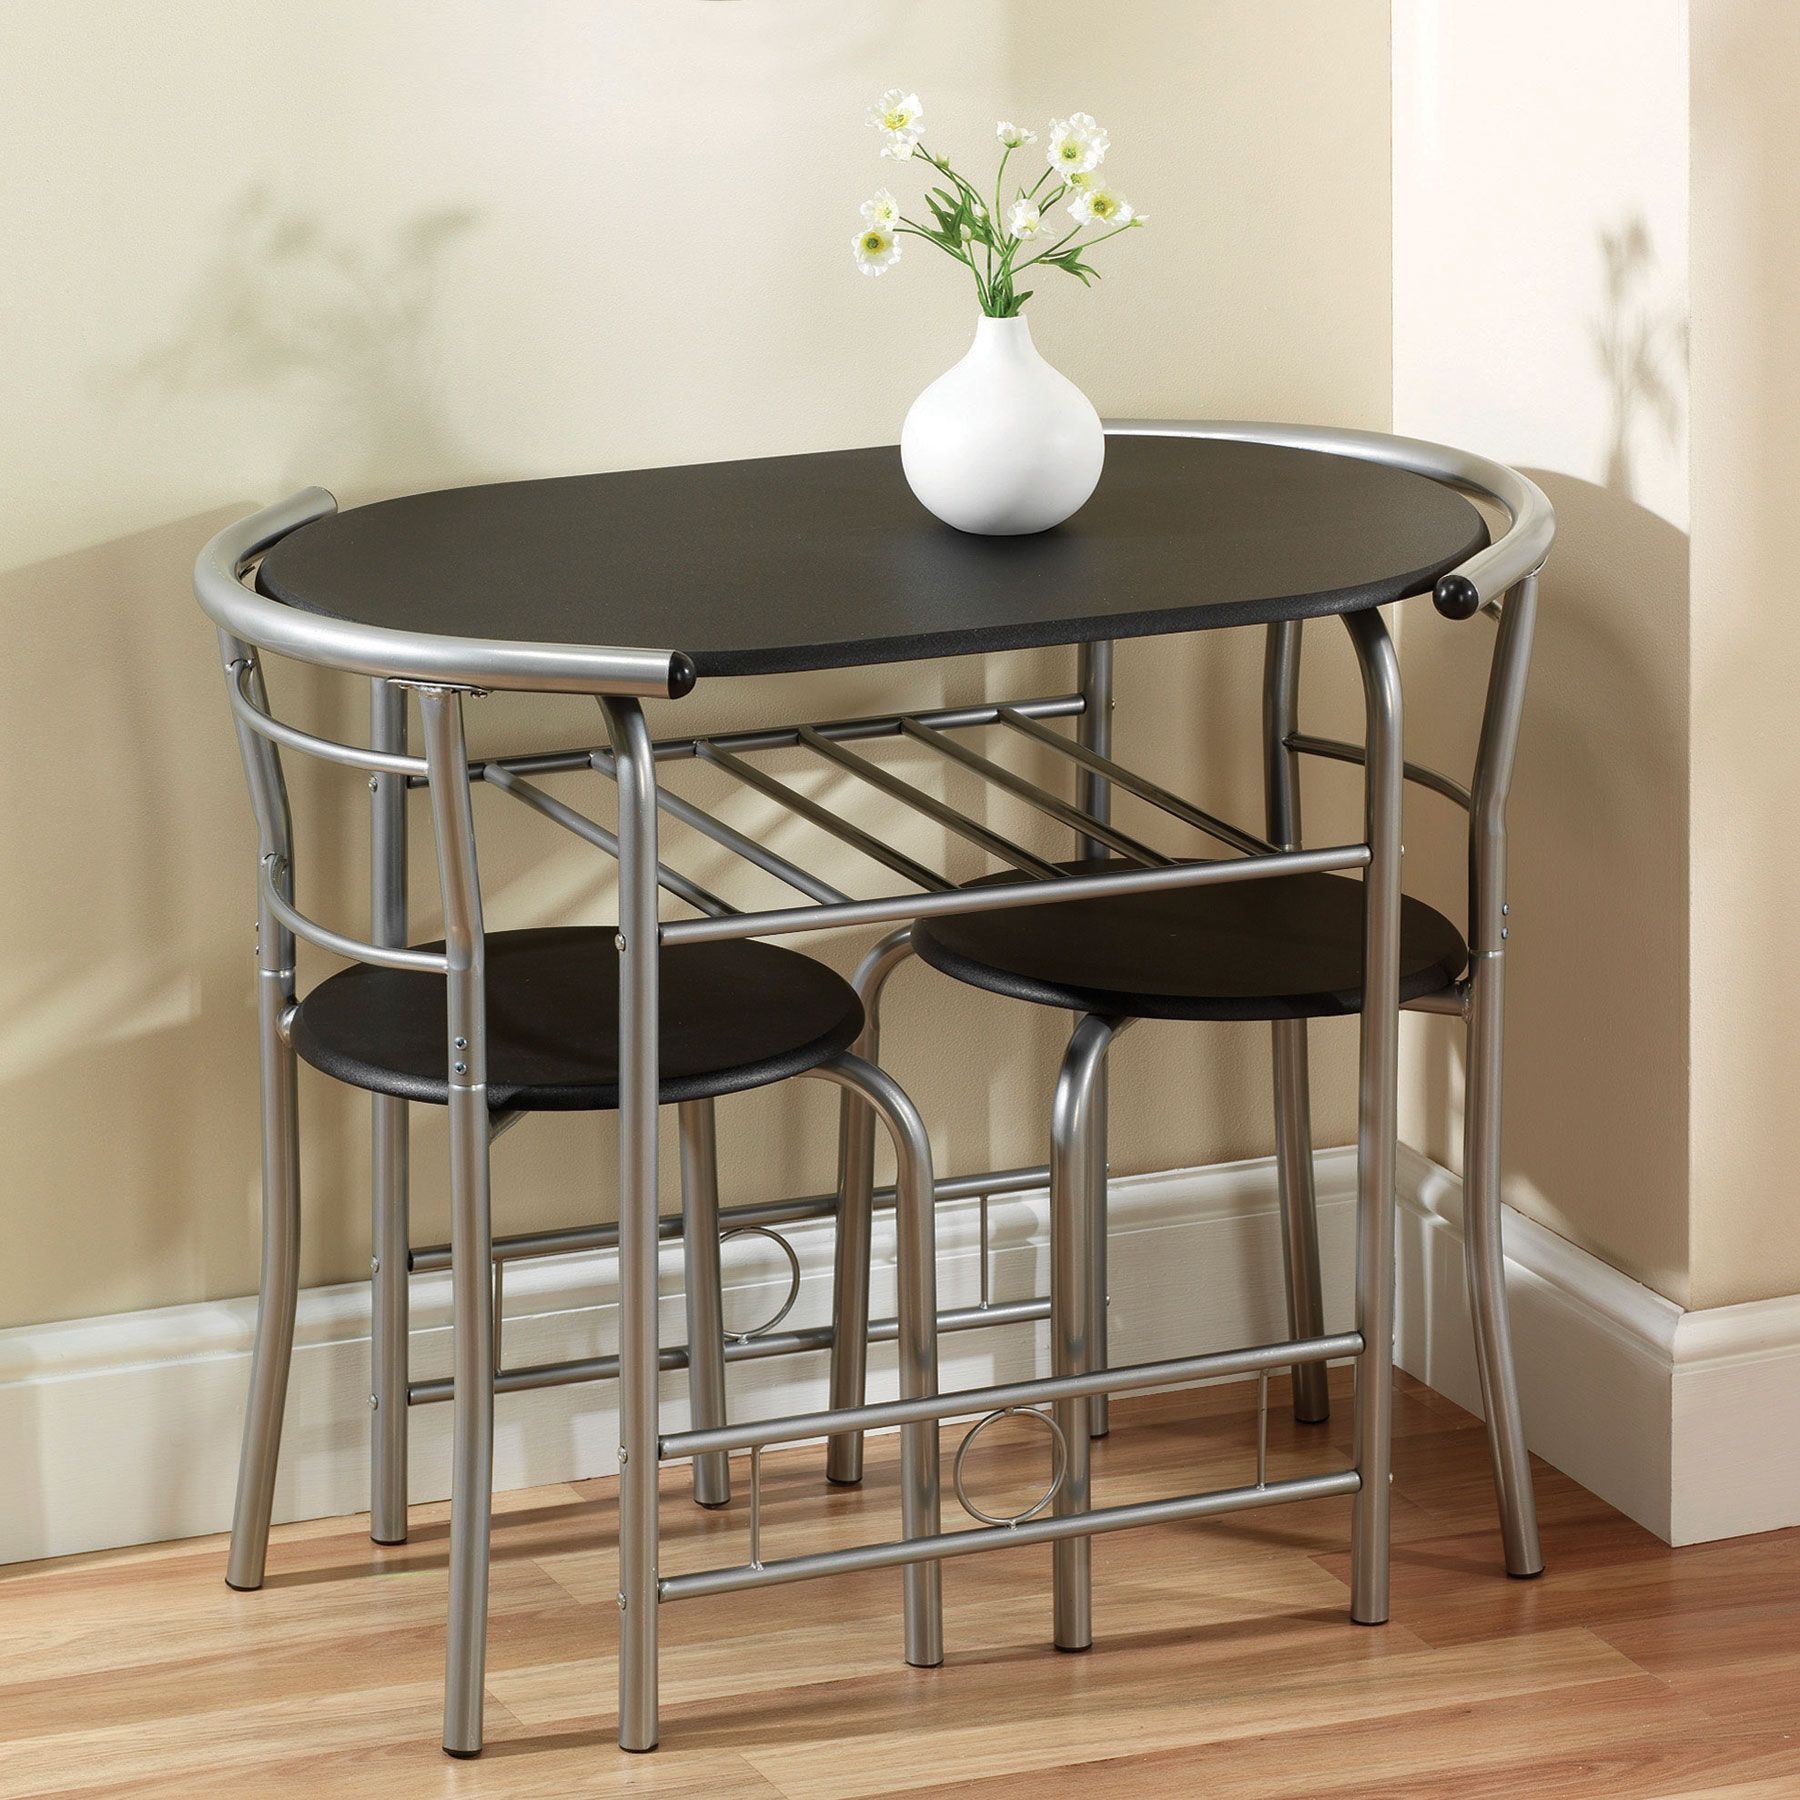 New chrome Metal Small Size Chair For Room/ /Kitchen Dinning Table Decoration 